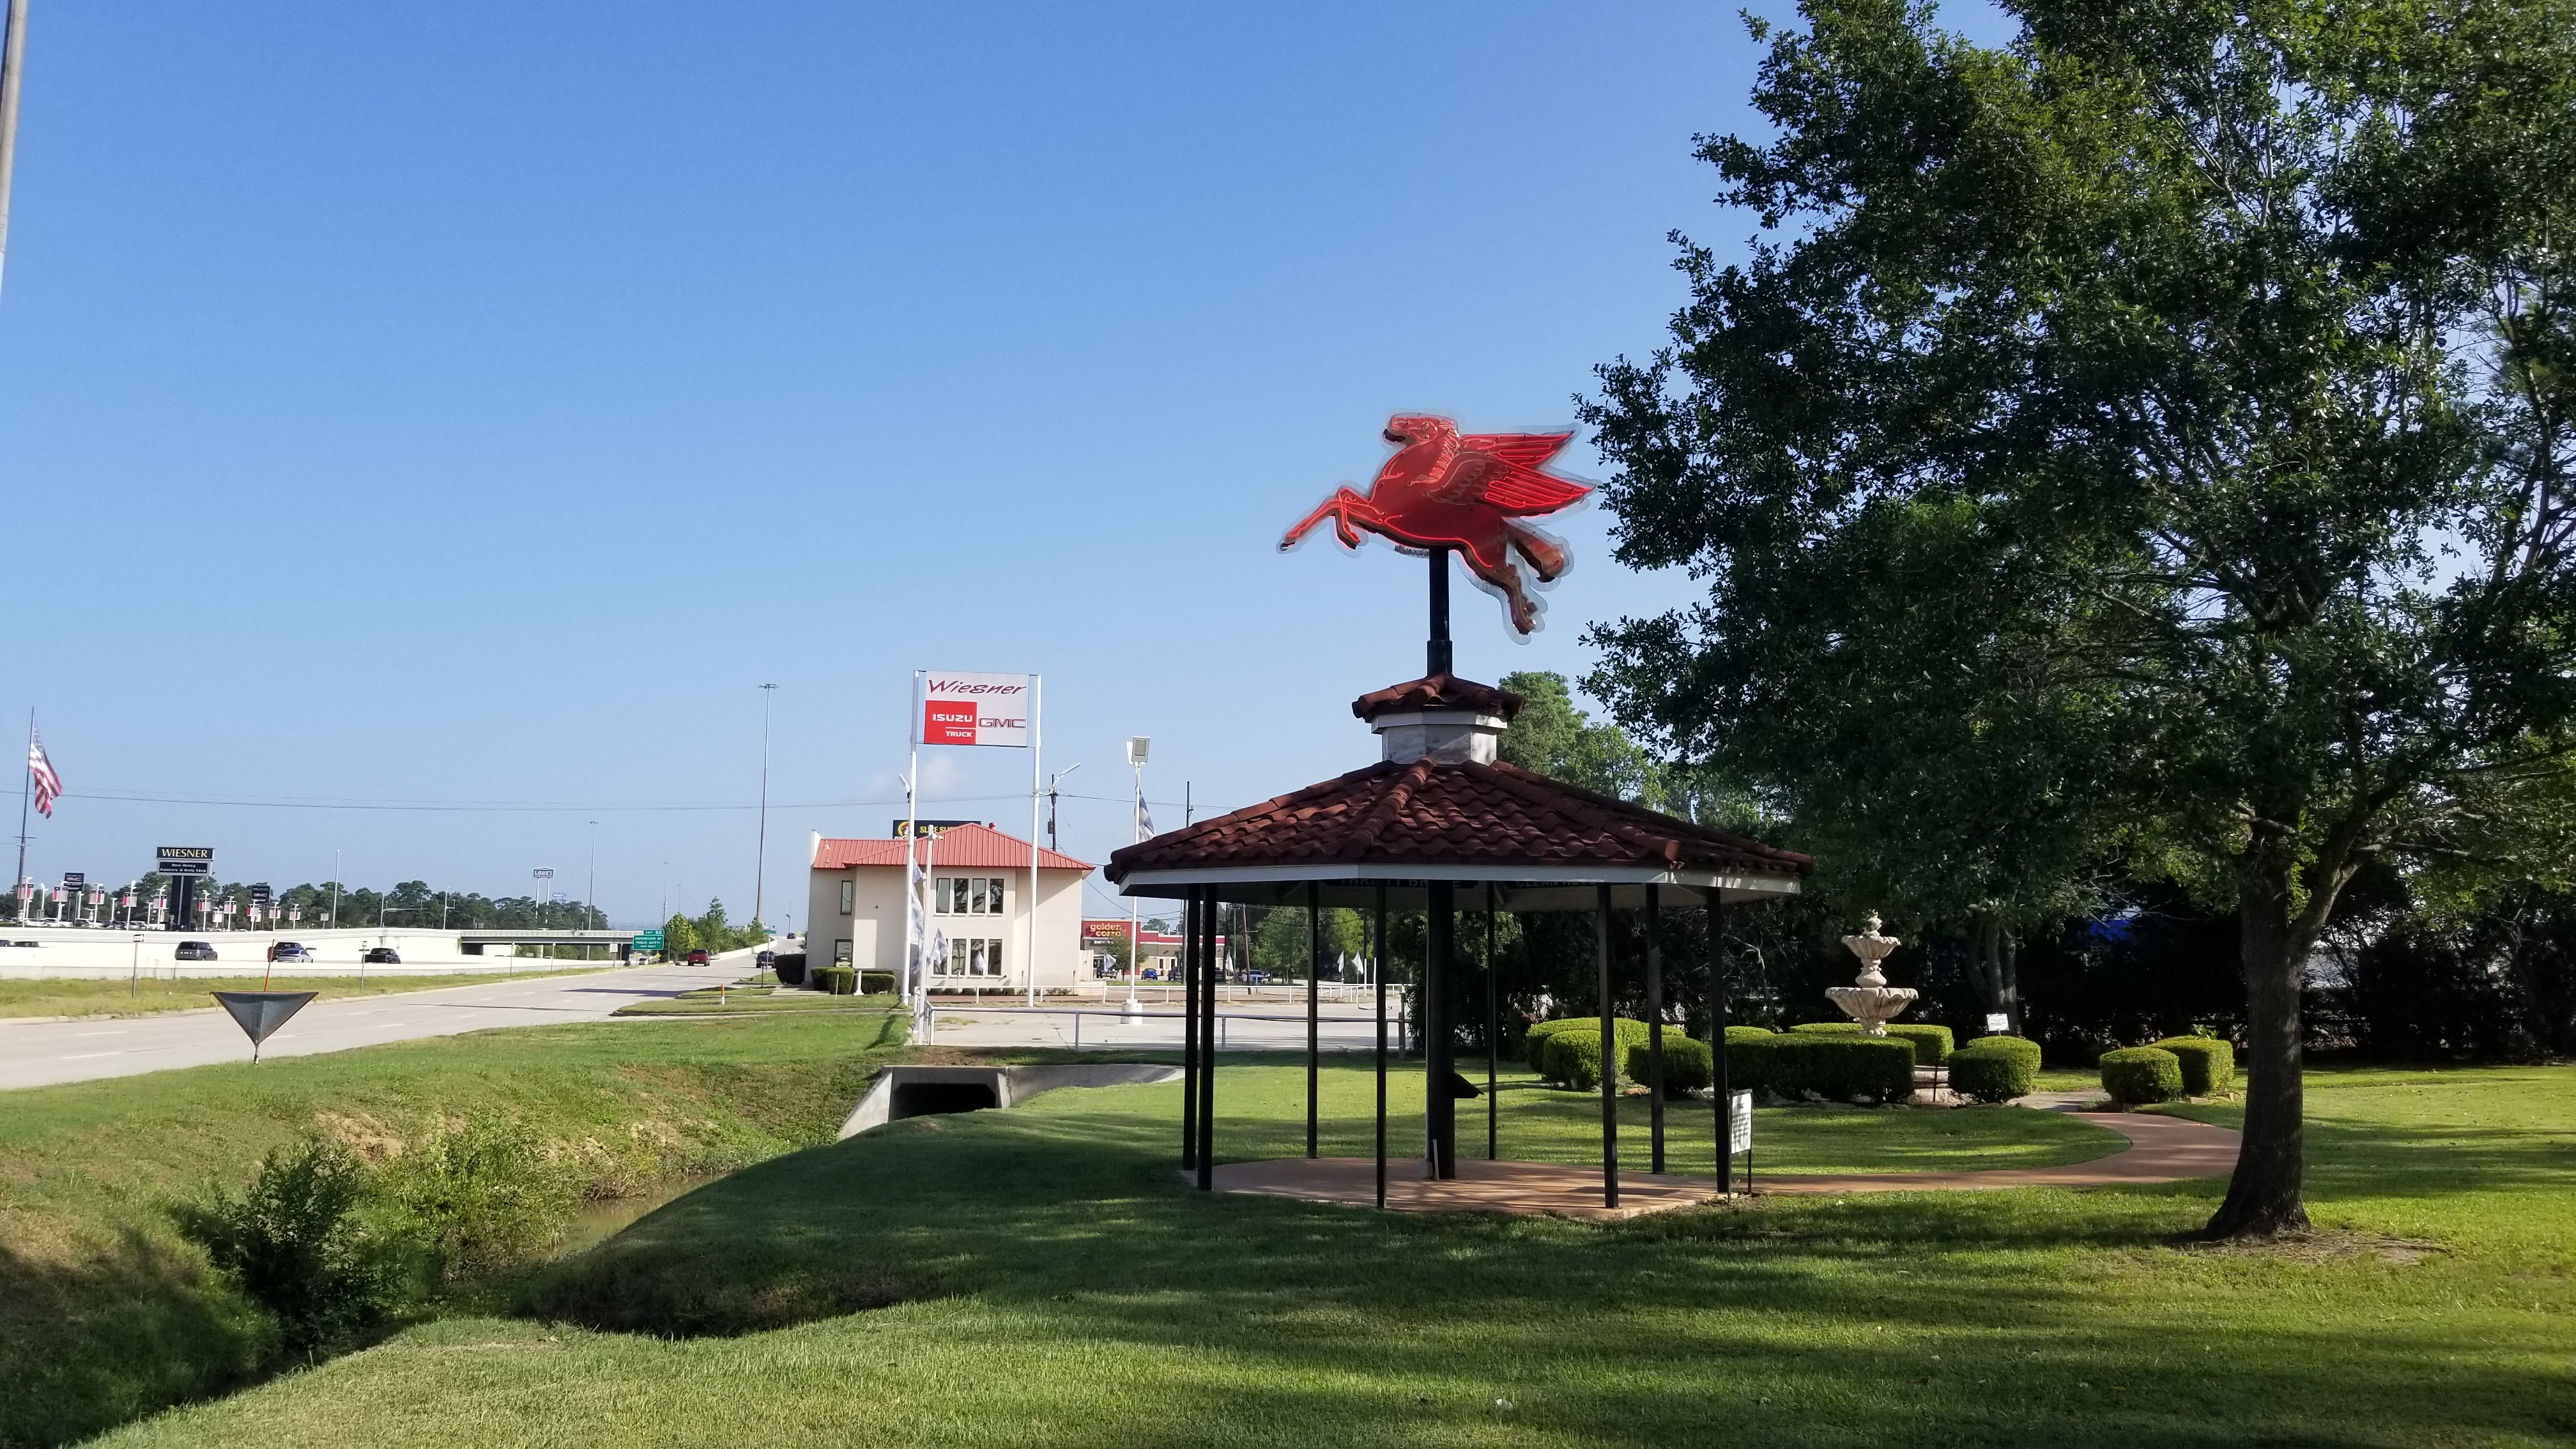 The view of the Pegasus and Marker by the highway